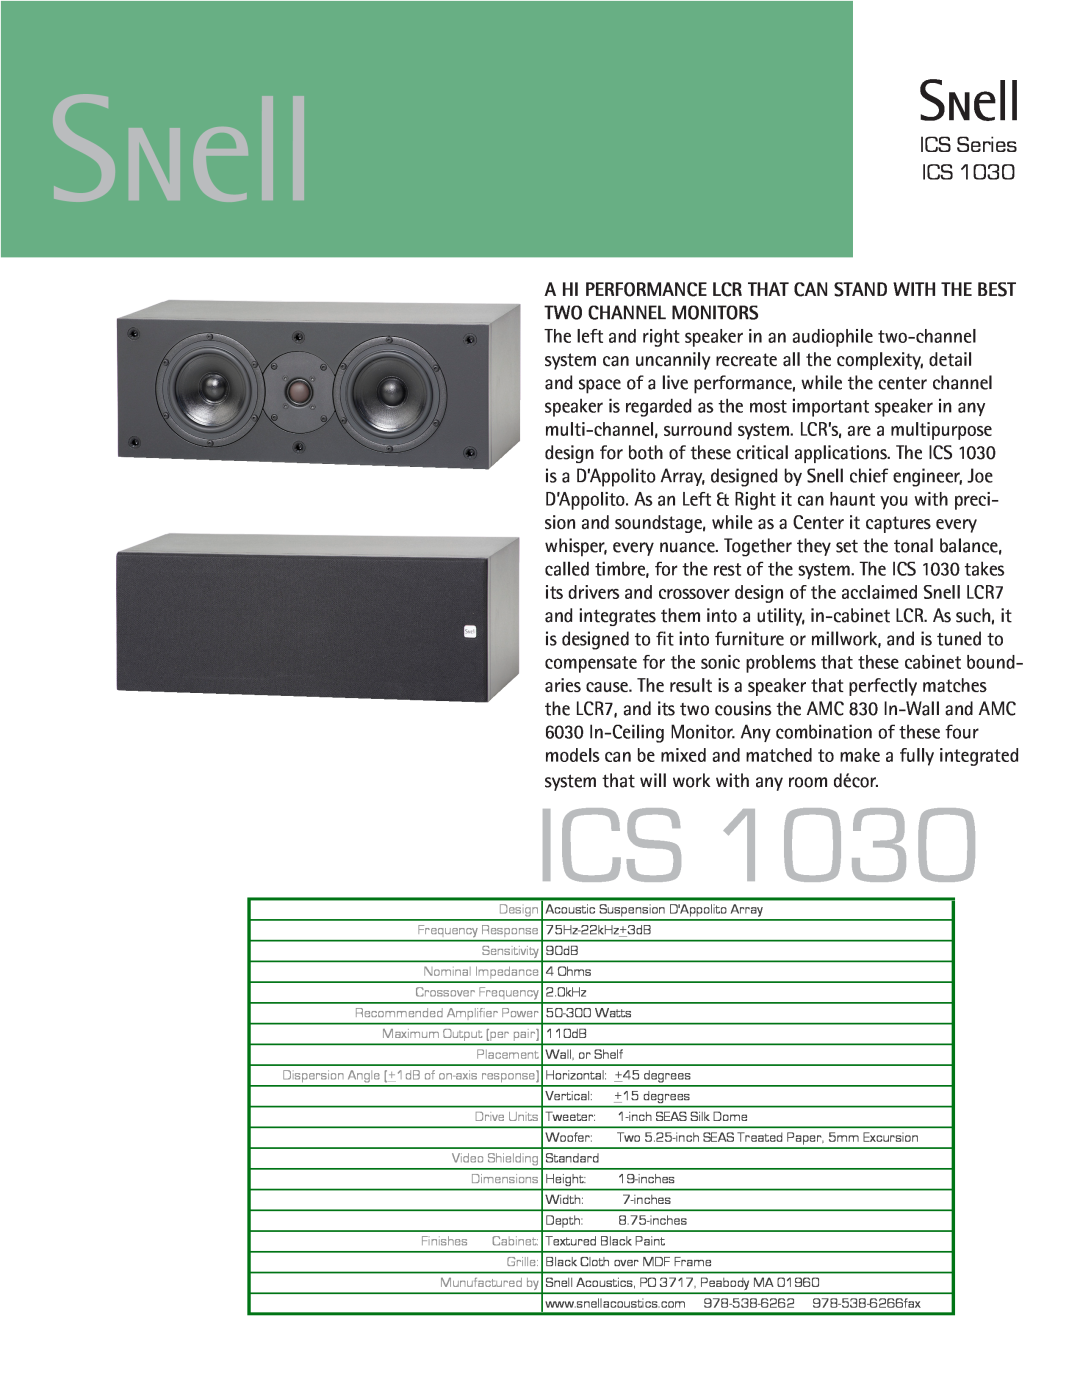 Snell Acoustics ICS 1030 dimensions ICS Series ICS, Two Channel Monitors, system that will work with any room décor 